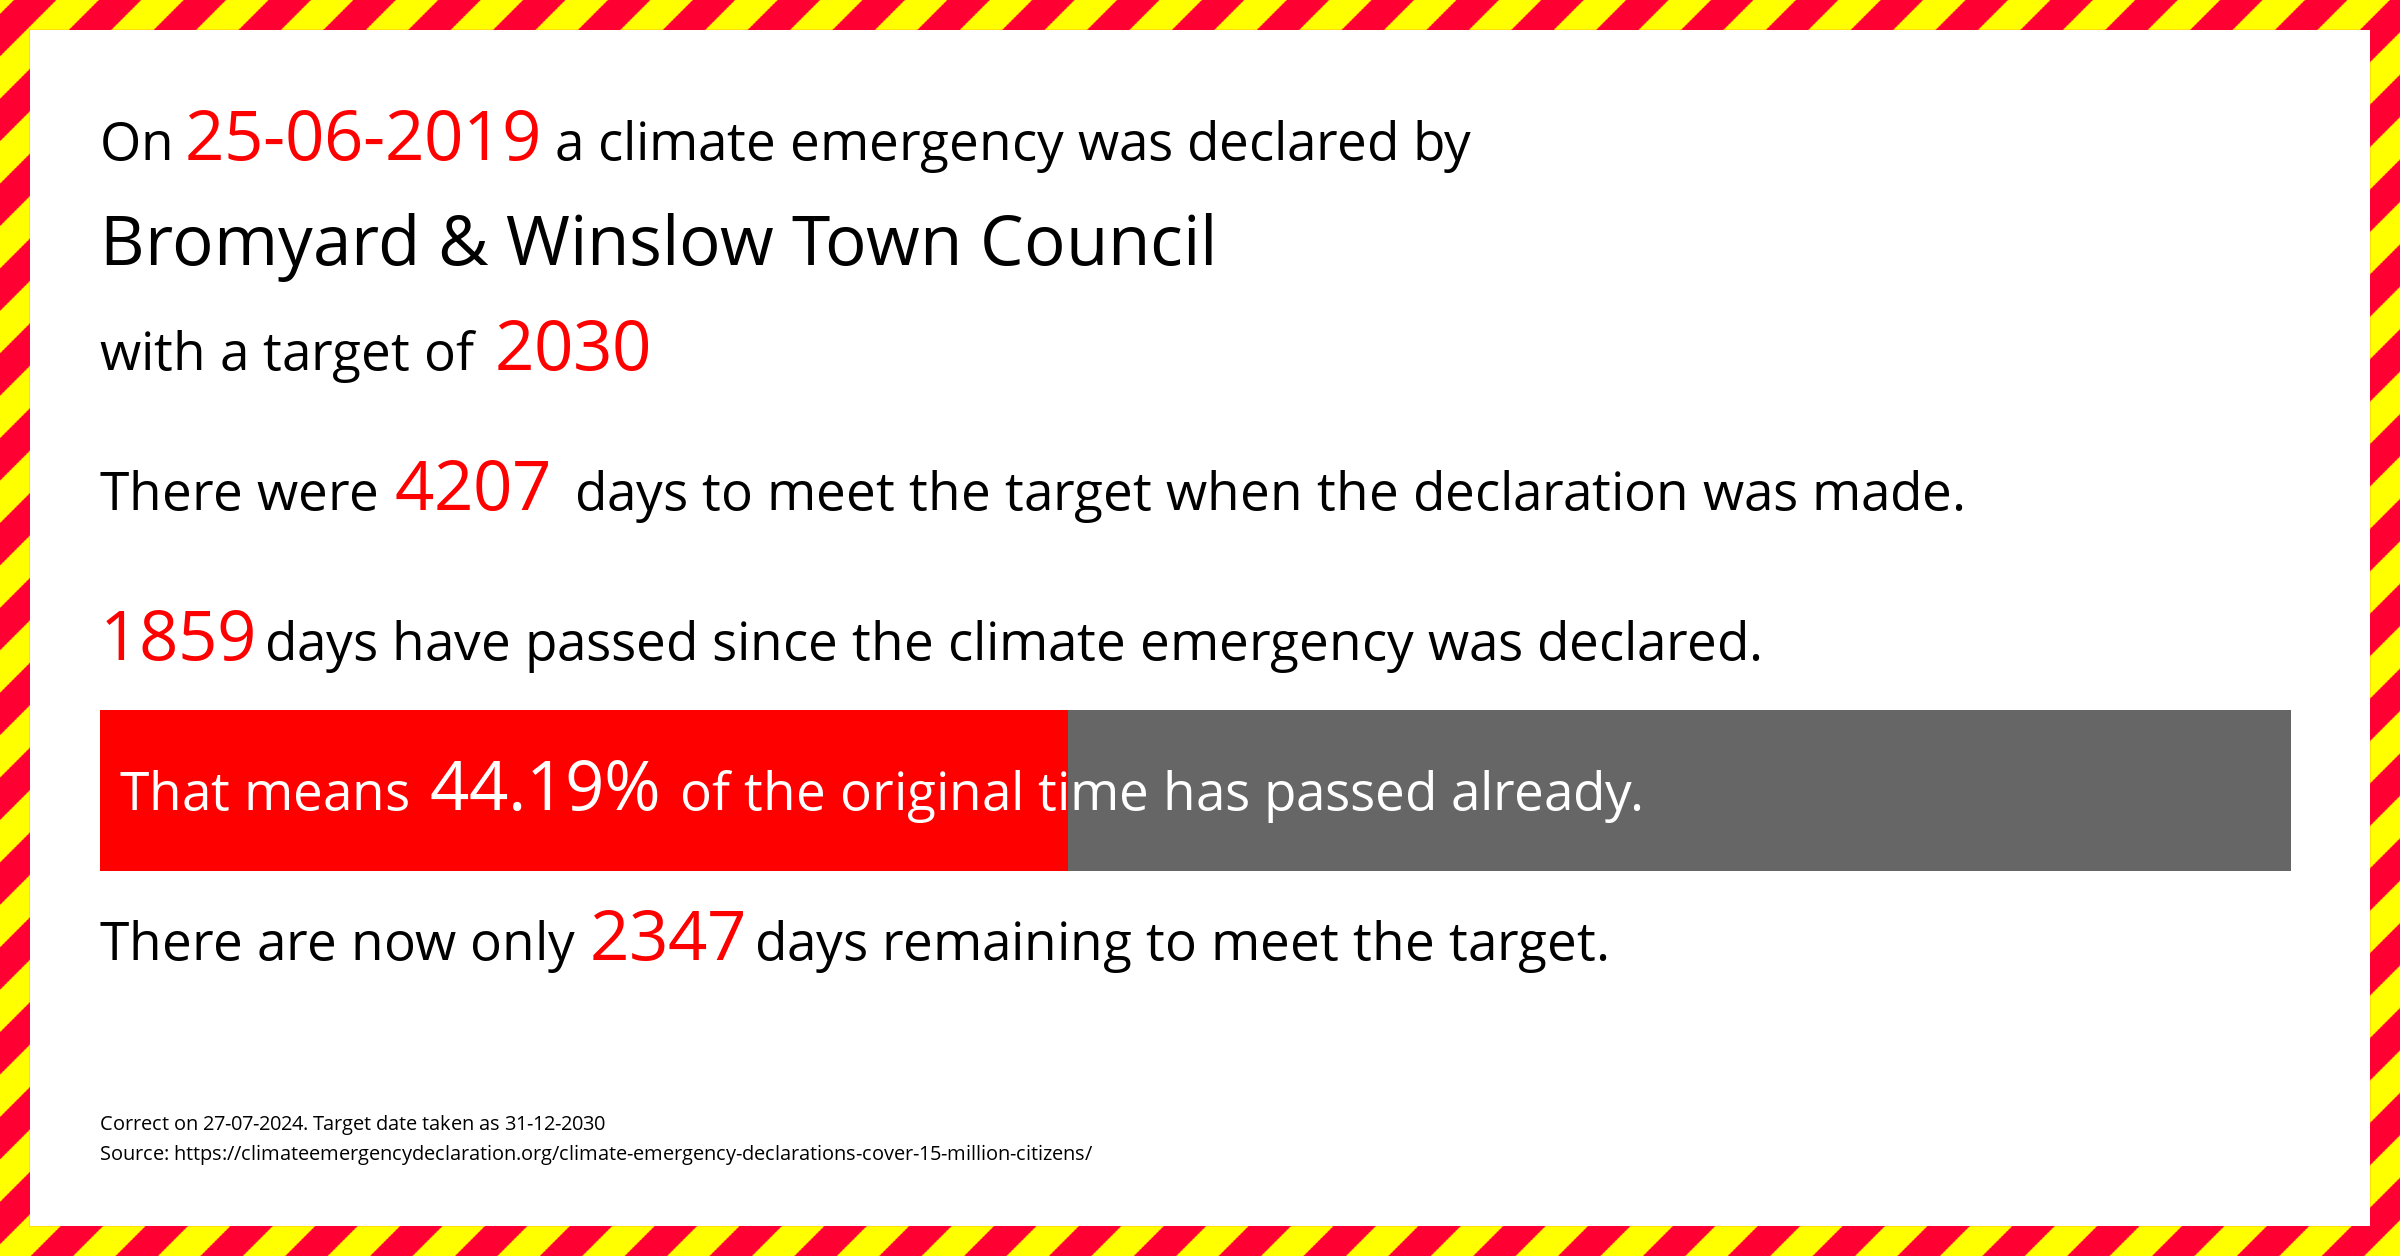 Bromyard & Winslow Town Council  declared a Climate emergency on Tuesday 25th June 2019, with a target of 2030.